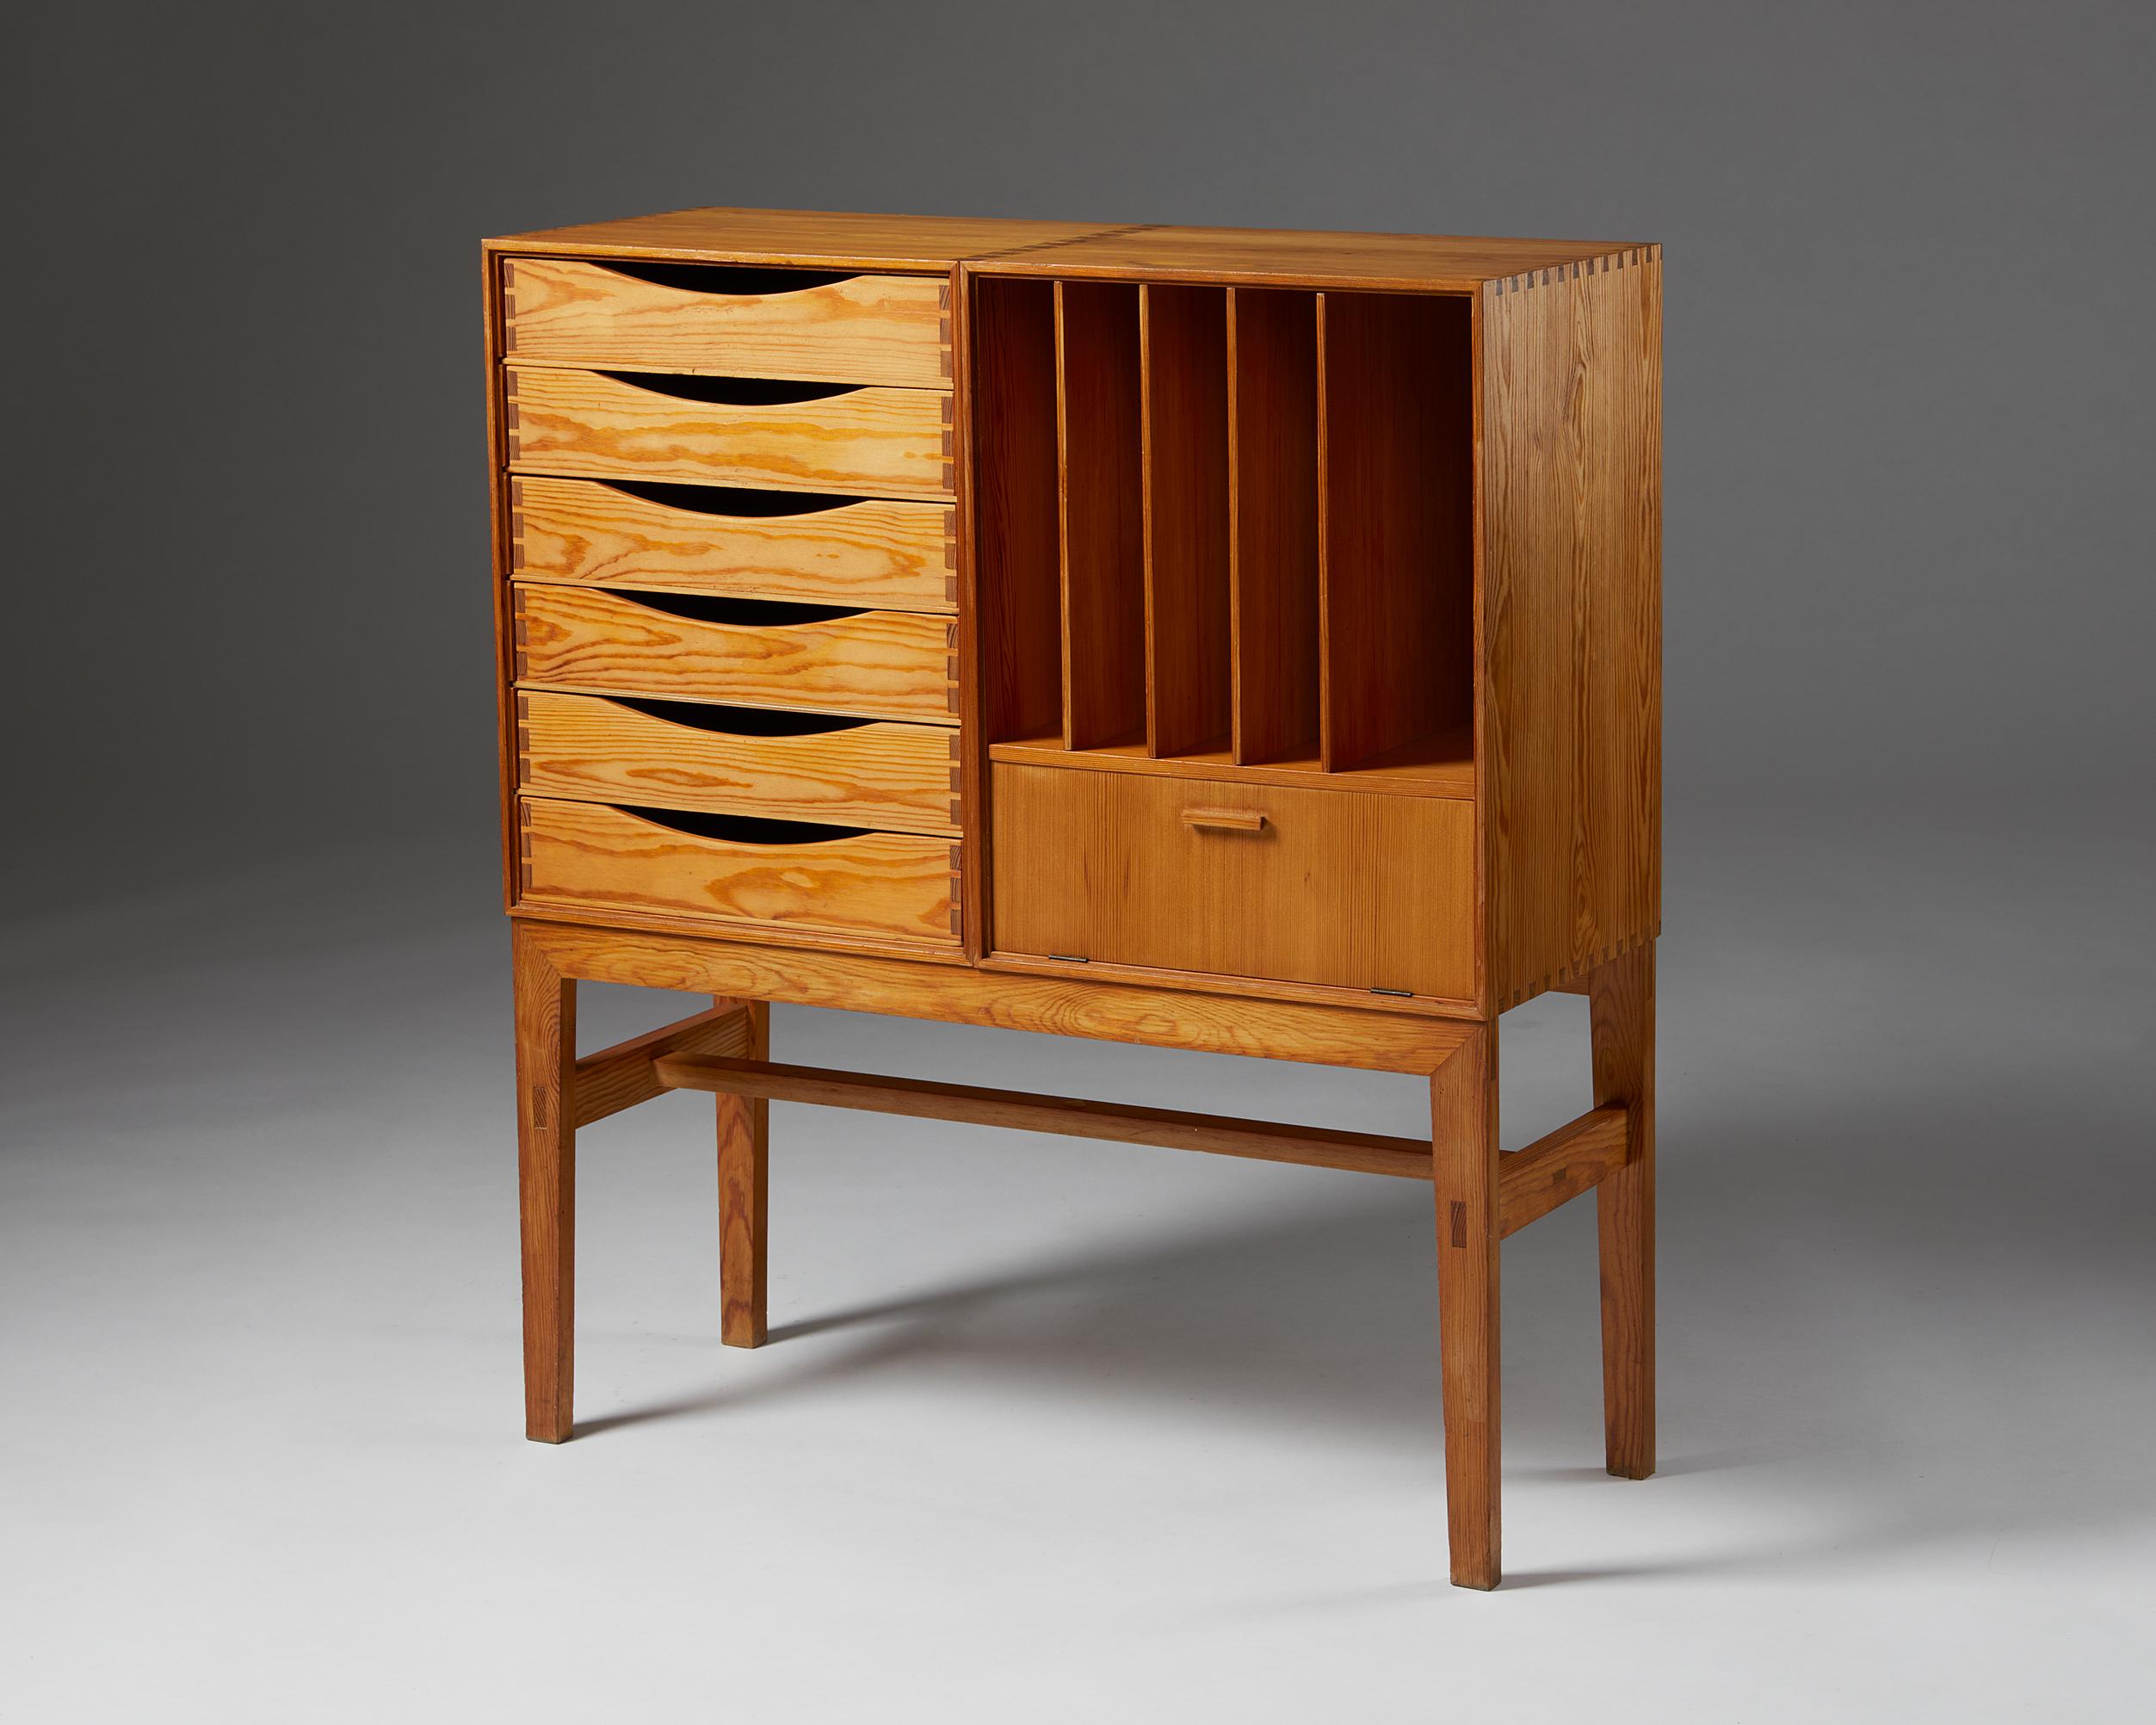 Cabinet, anonymous,
Denmark, 1950s.

Oregon pine. 

This charming piece is an exquisite example of Danish cabinetmaking. The visible corner joints and the stretcher’s through mortise and tenon joints show unparalleled craftsmanship. Scandinavian